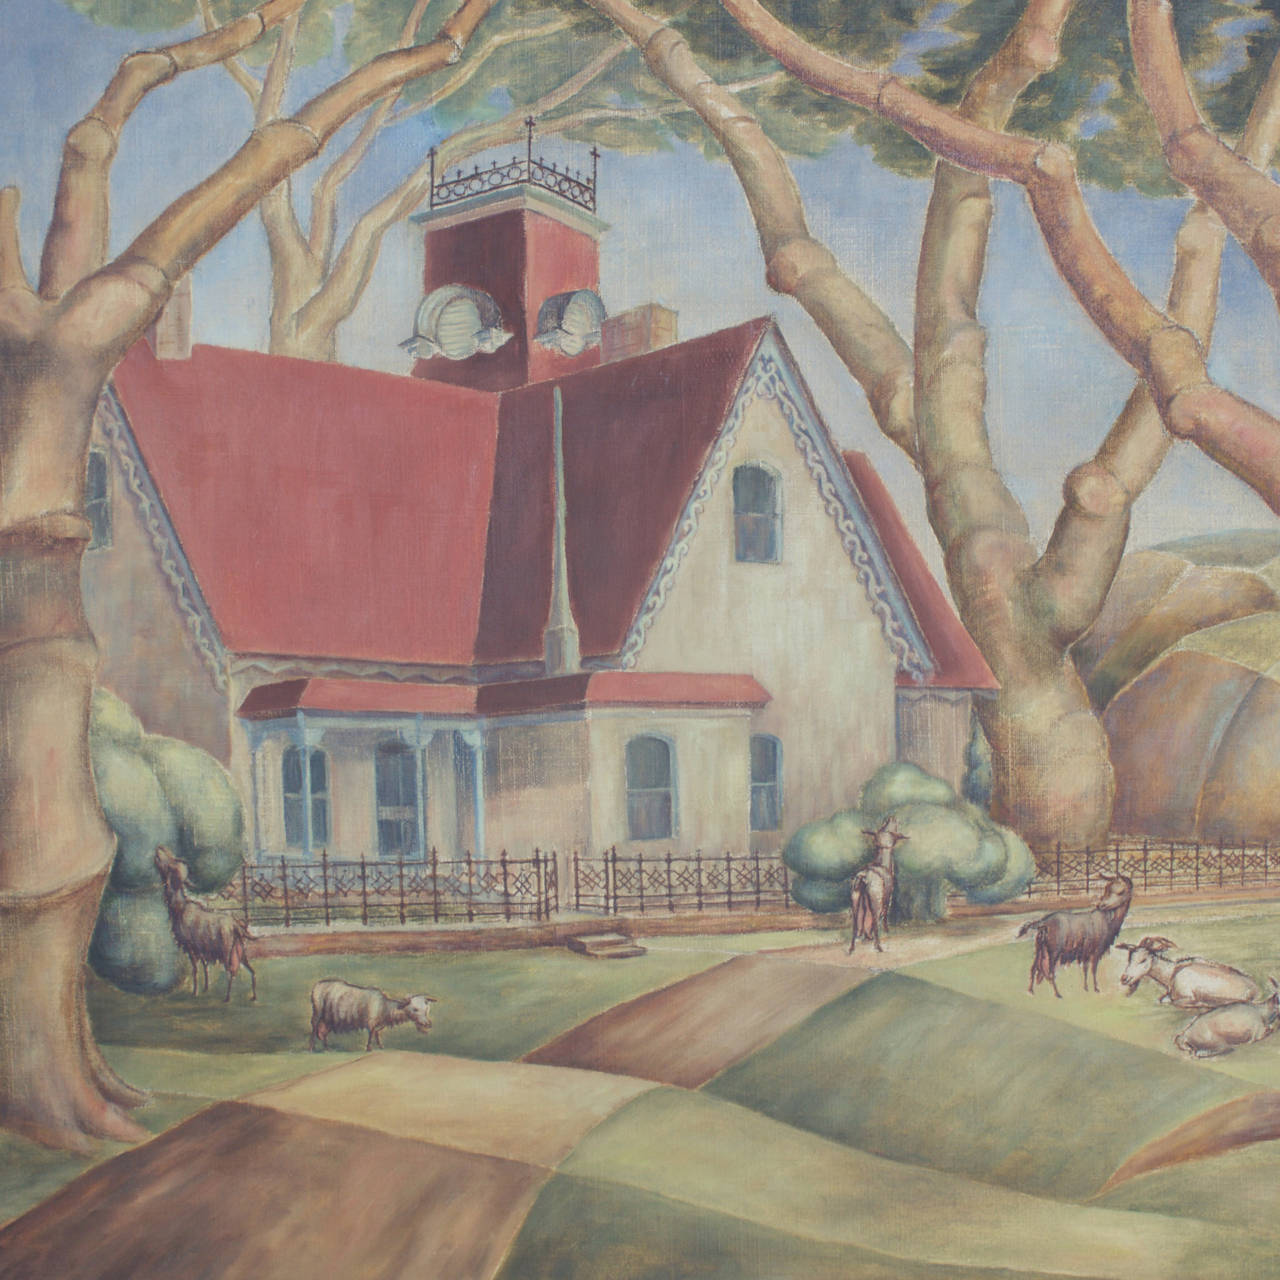 Stylized 1930s Art Deco oil on canvas. This painting has a tight well balanced composition of trees, farm animals and a Victorian house. Having earthy muted palette and presented in the original frame. Signed R H Hardesty 1935 on the lower left.